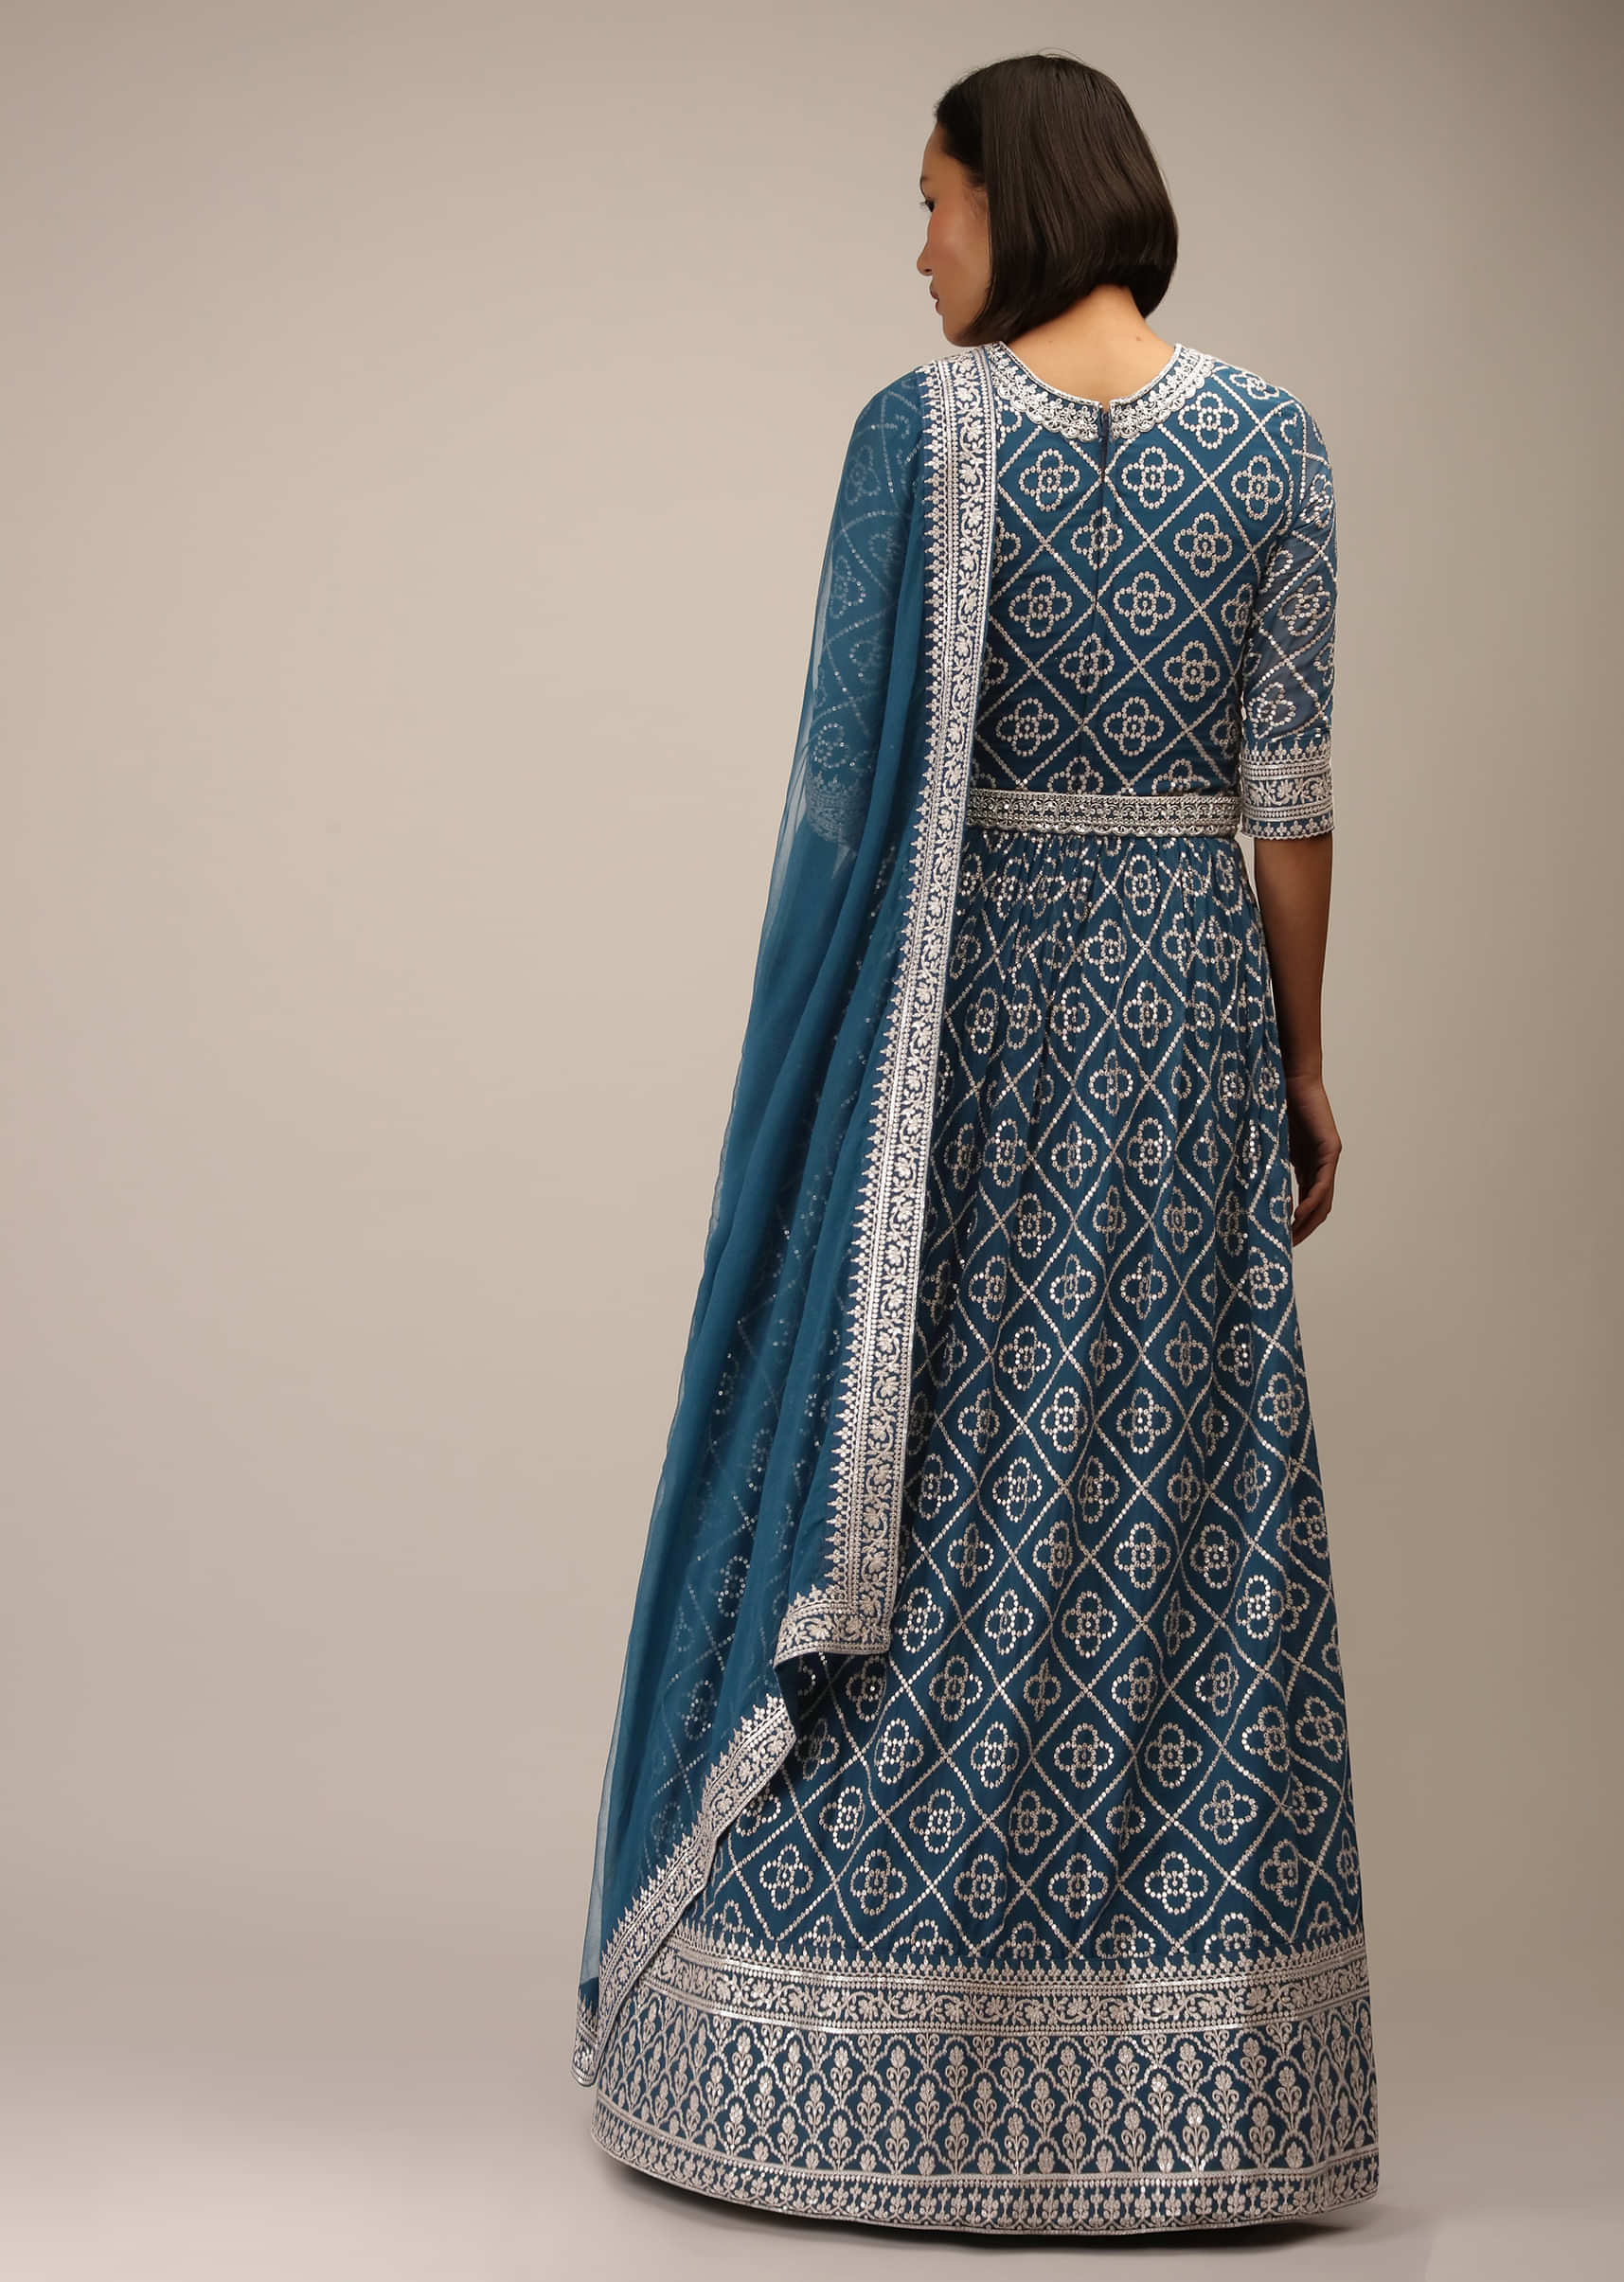 Peacock Blue Anarkali Suit In Georgette With Zari And Sequins Embroidered Jaal And Three Quarter Sleeves